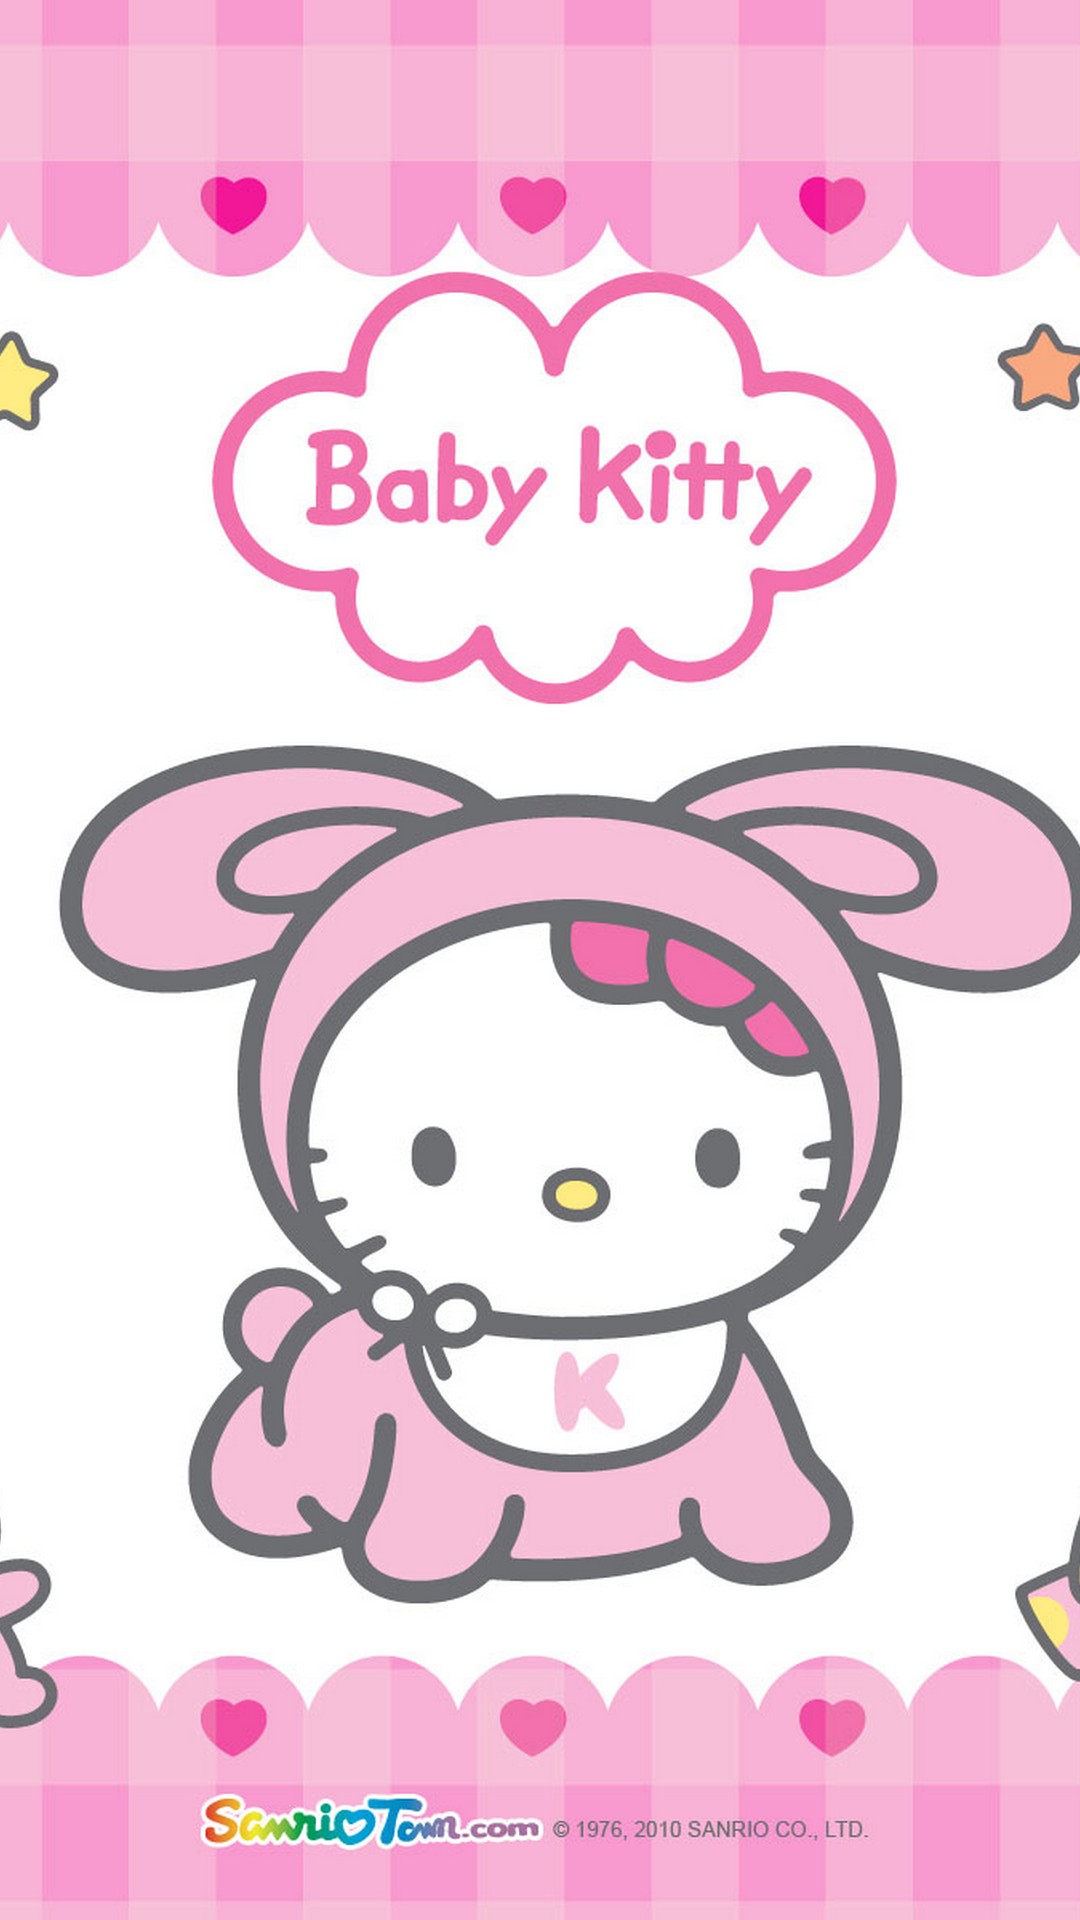 Wallpaper Hello Kitty iPhone with image resolution 1080x1920 pixel. You can use this wallpaper as background for your desktop Computer Screensavers, Android or iPhone smartphones